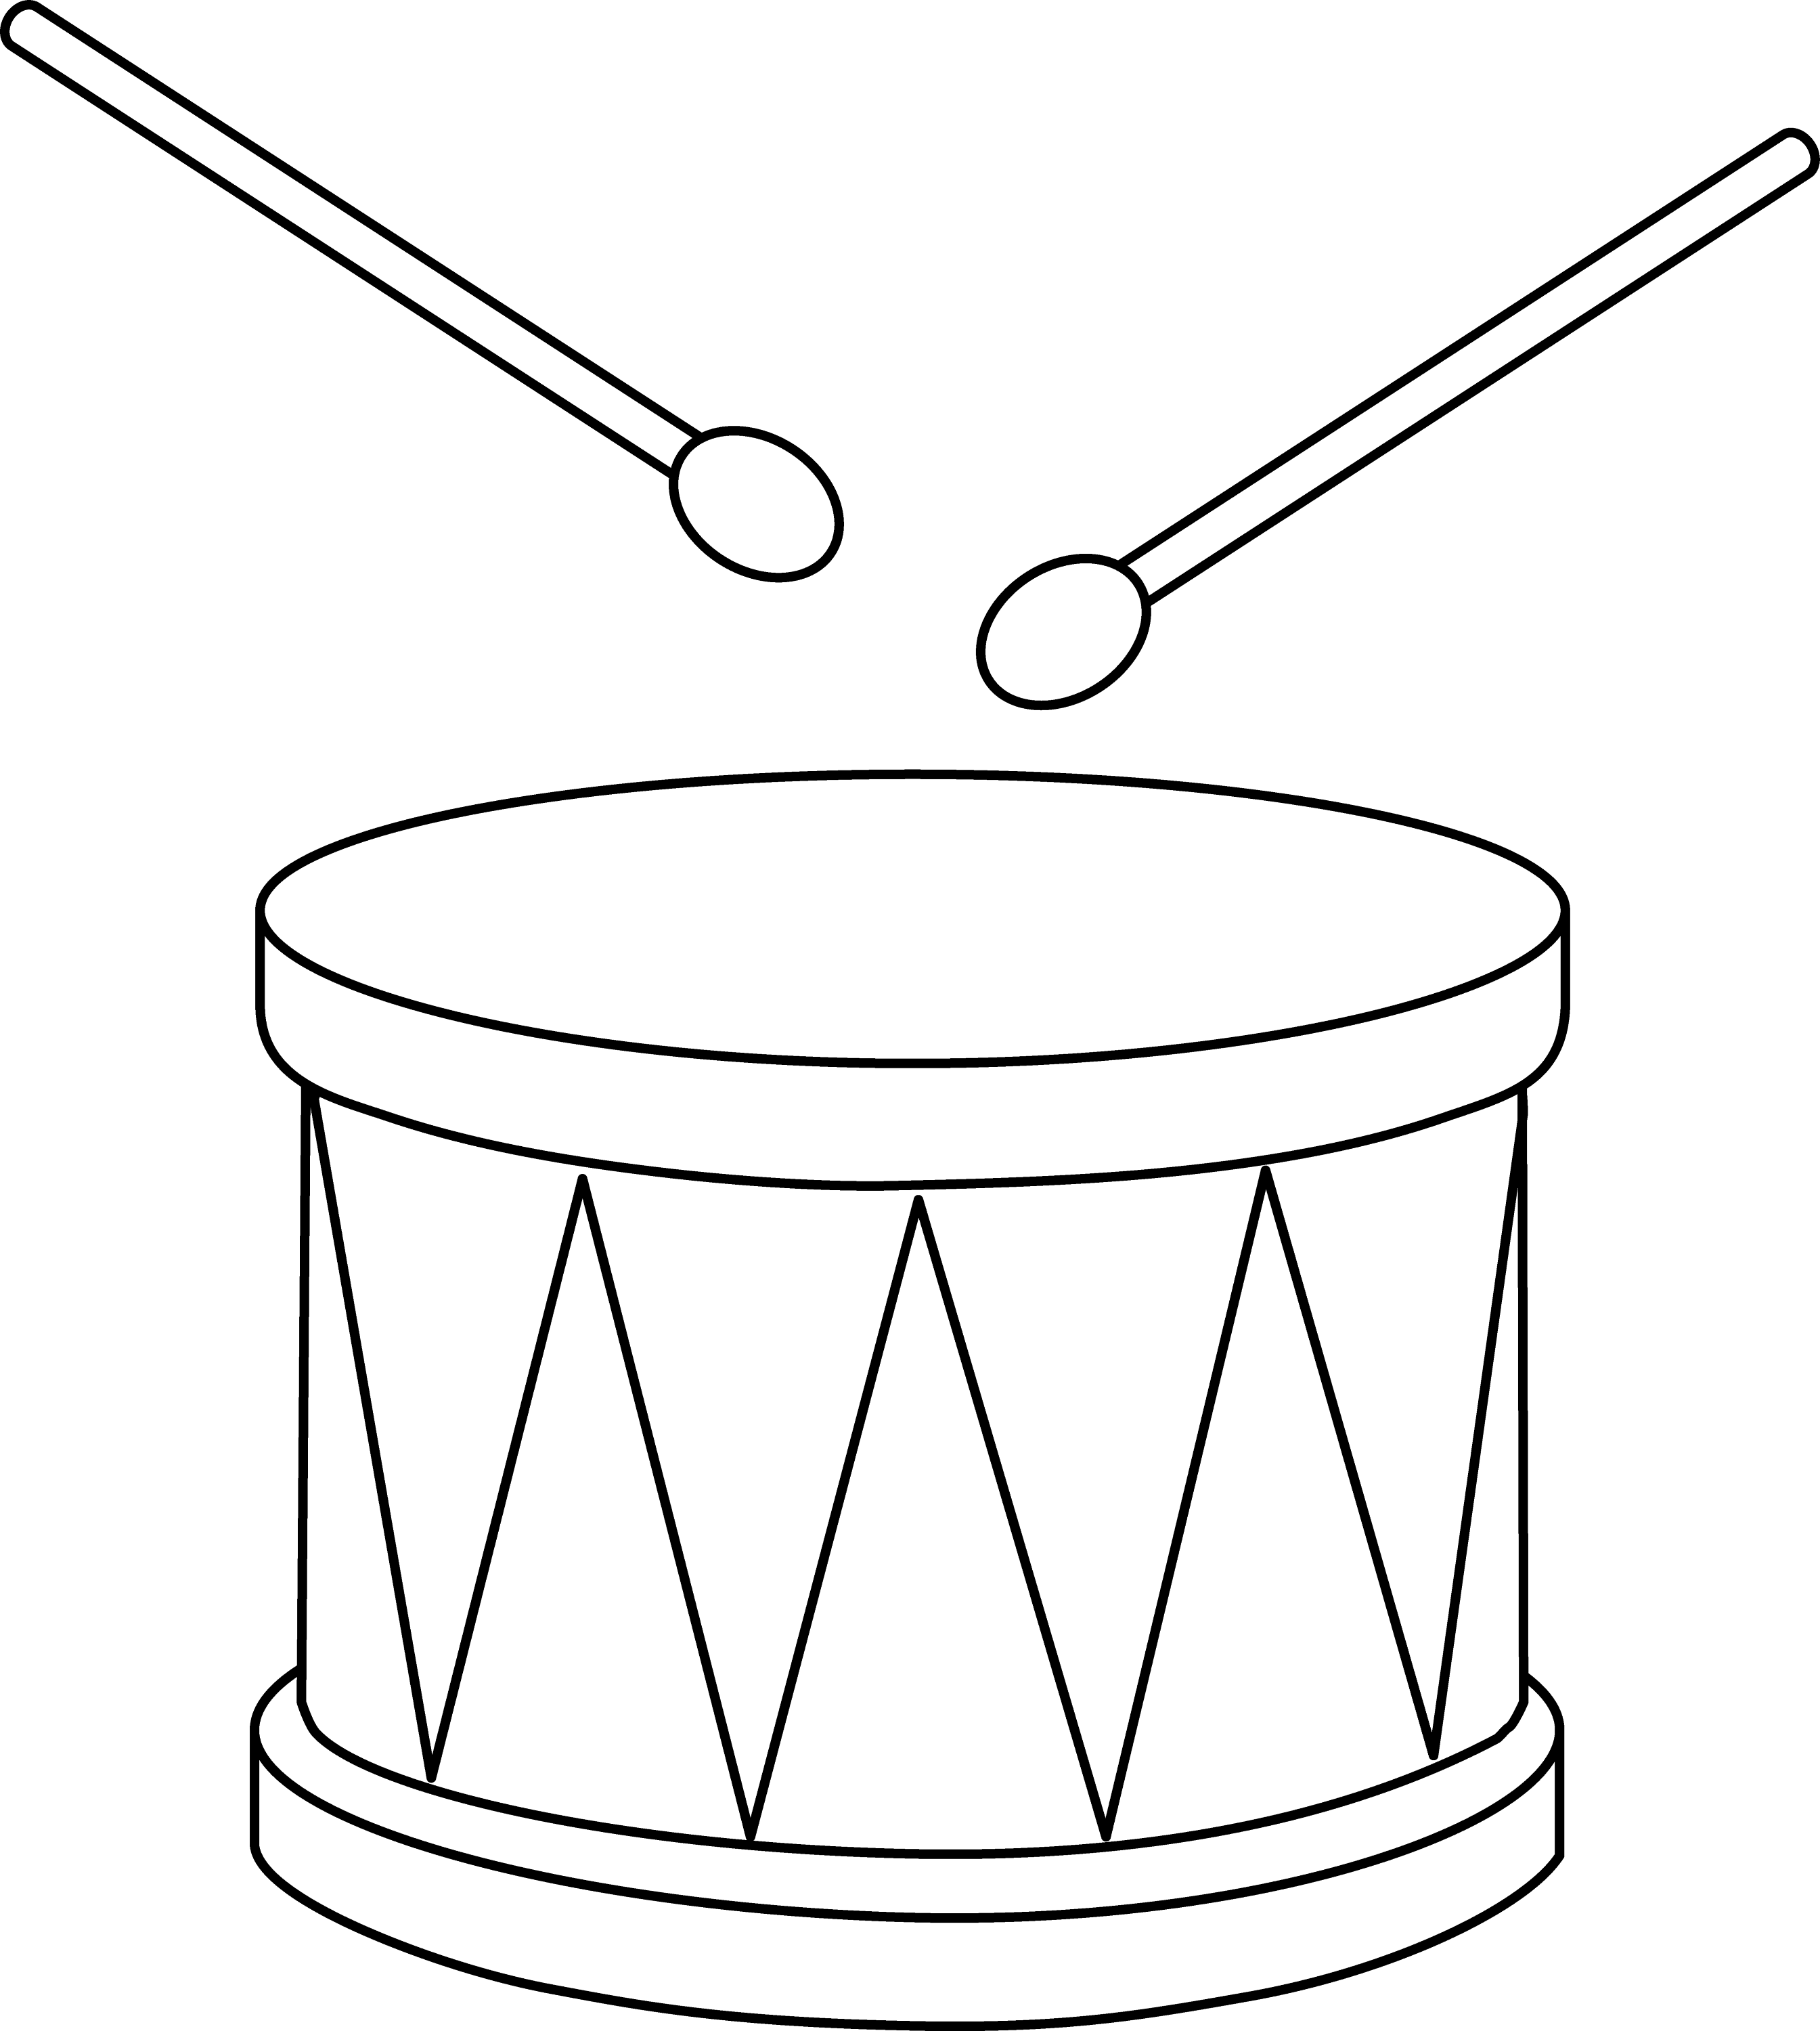 marching band hat clip art - photo #31